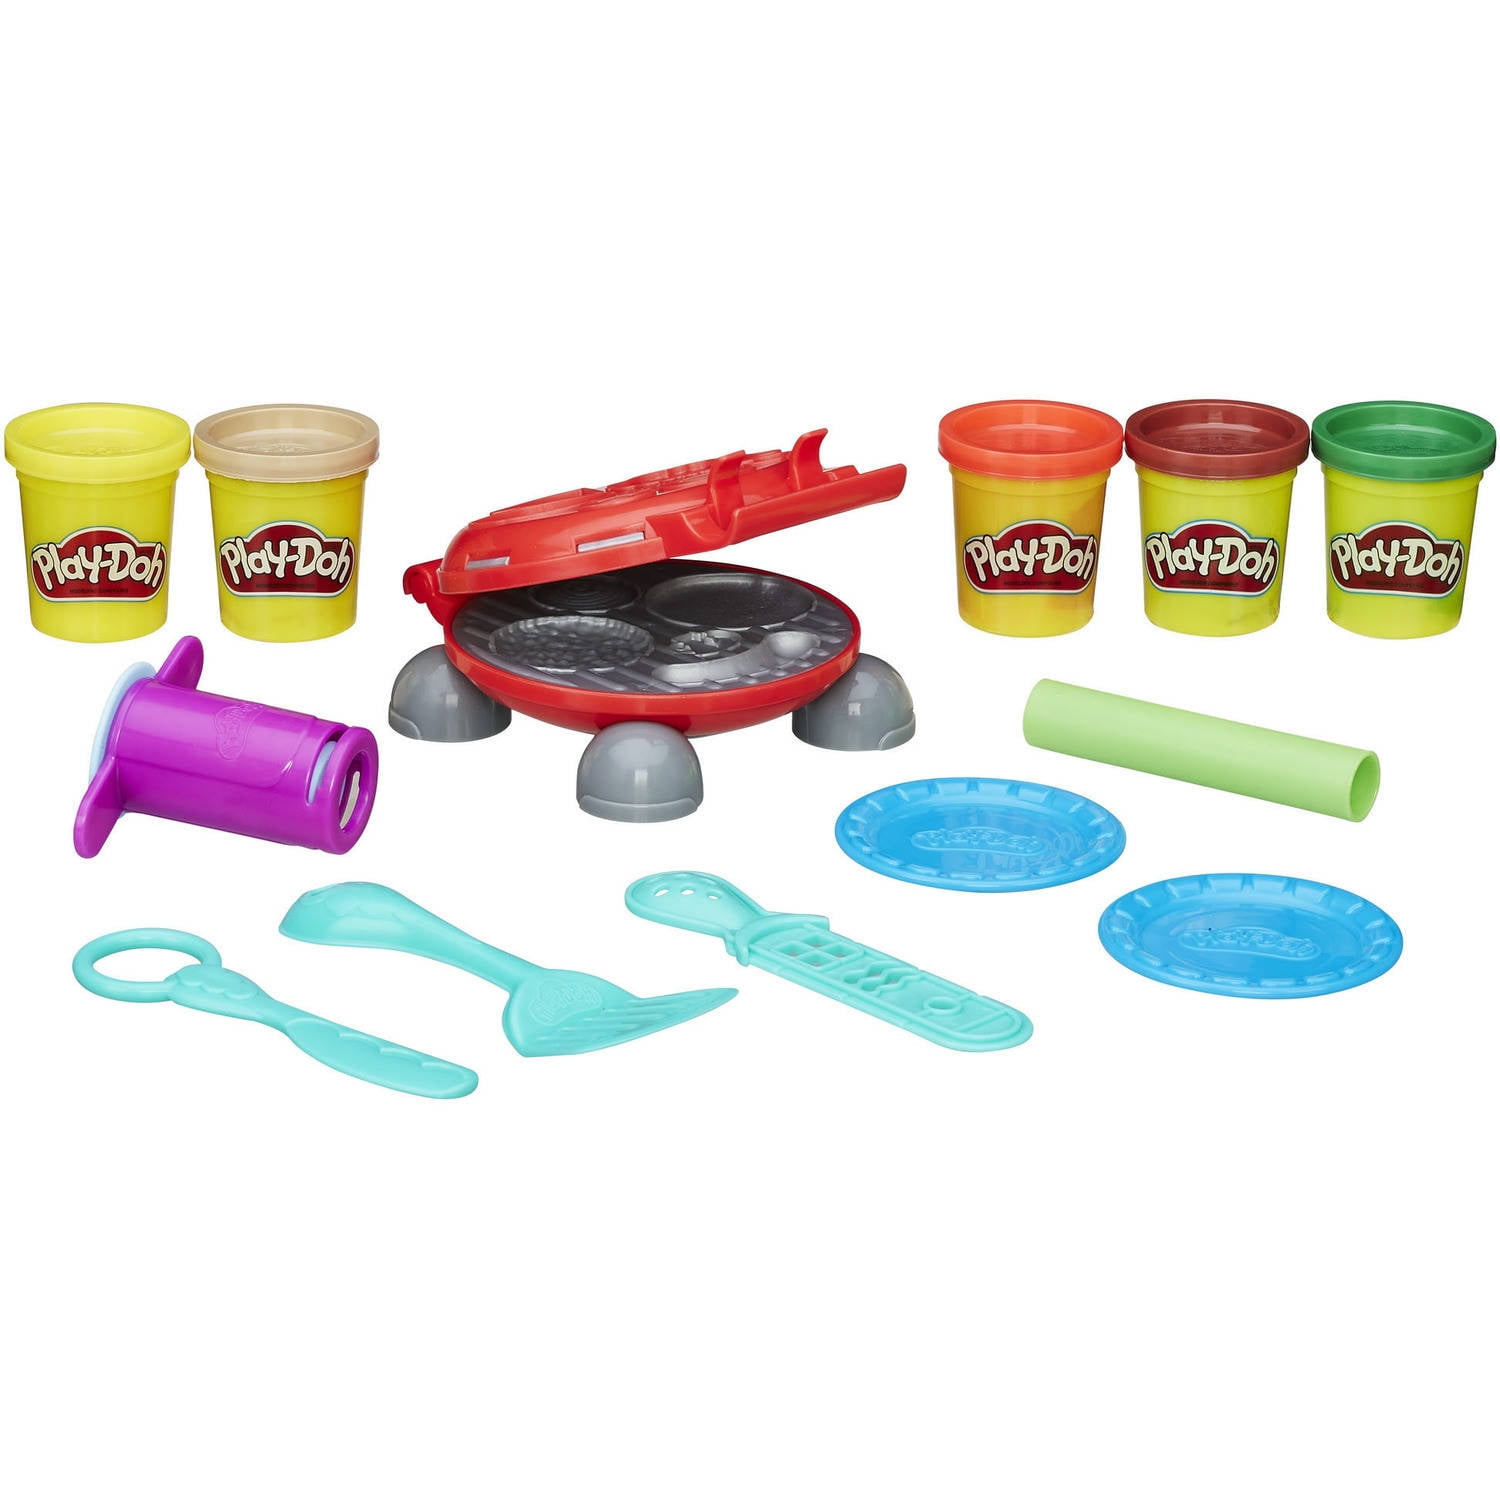 Hasbro Play-doh Kitchen Creations Great Baking Book Set 50 Pieces Pn00039913 for sale online 